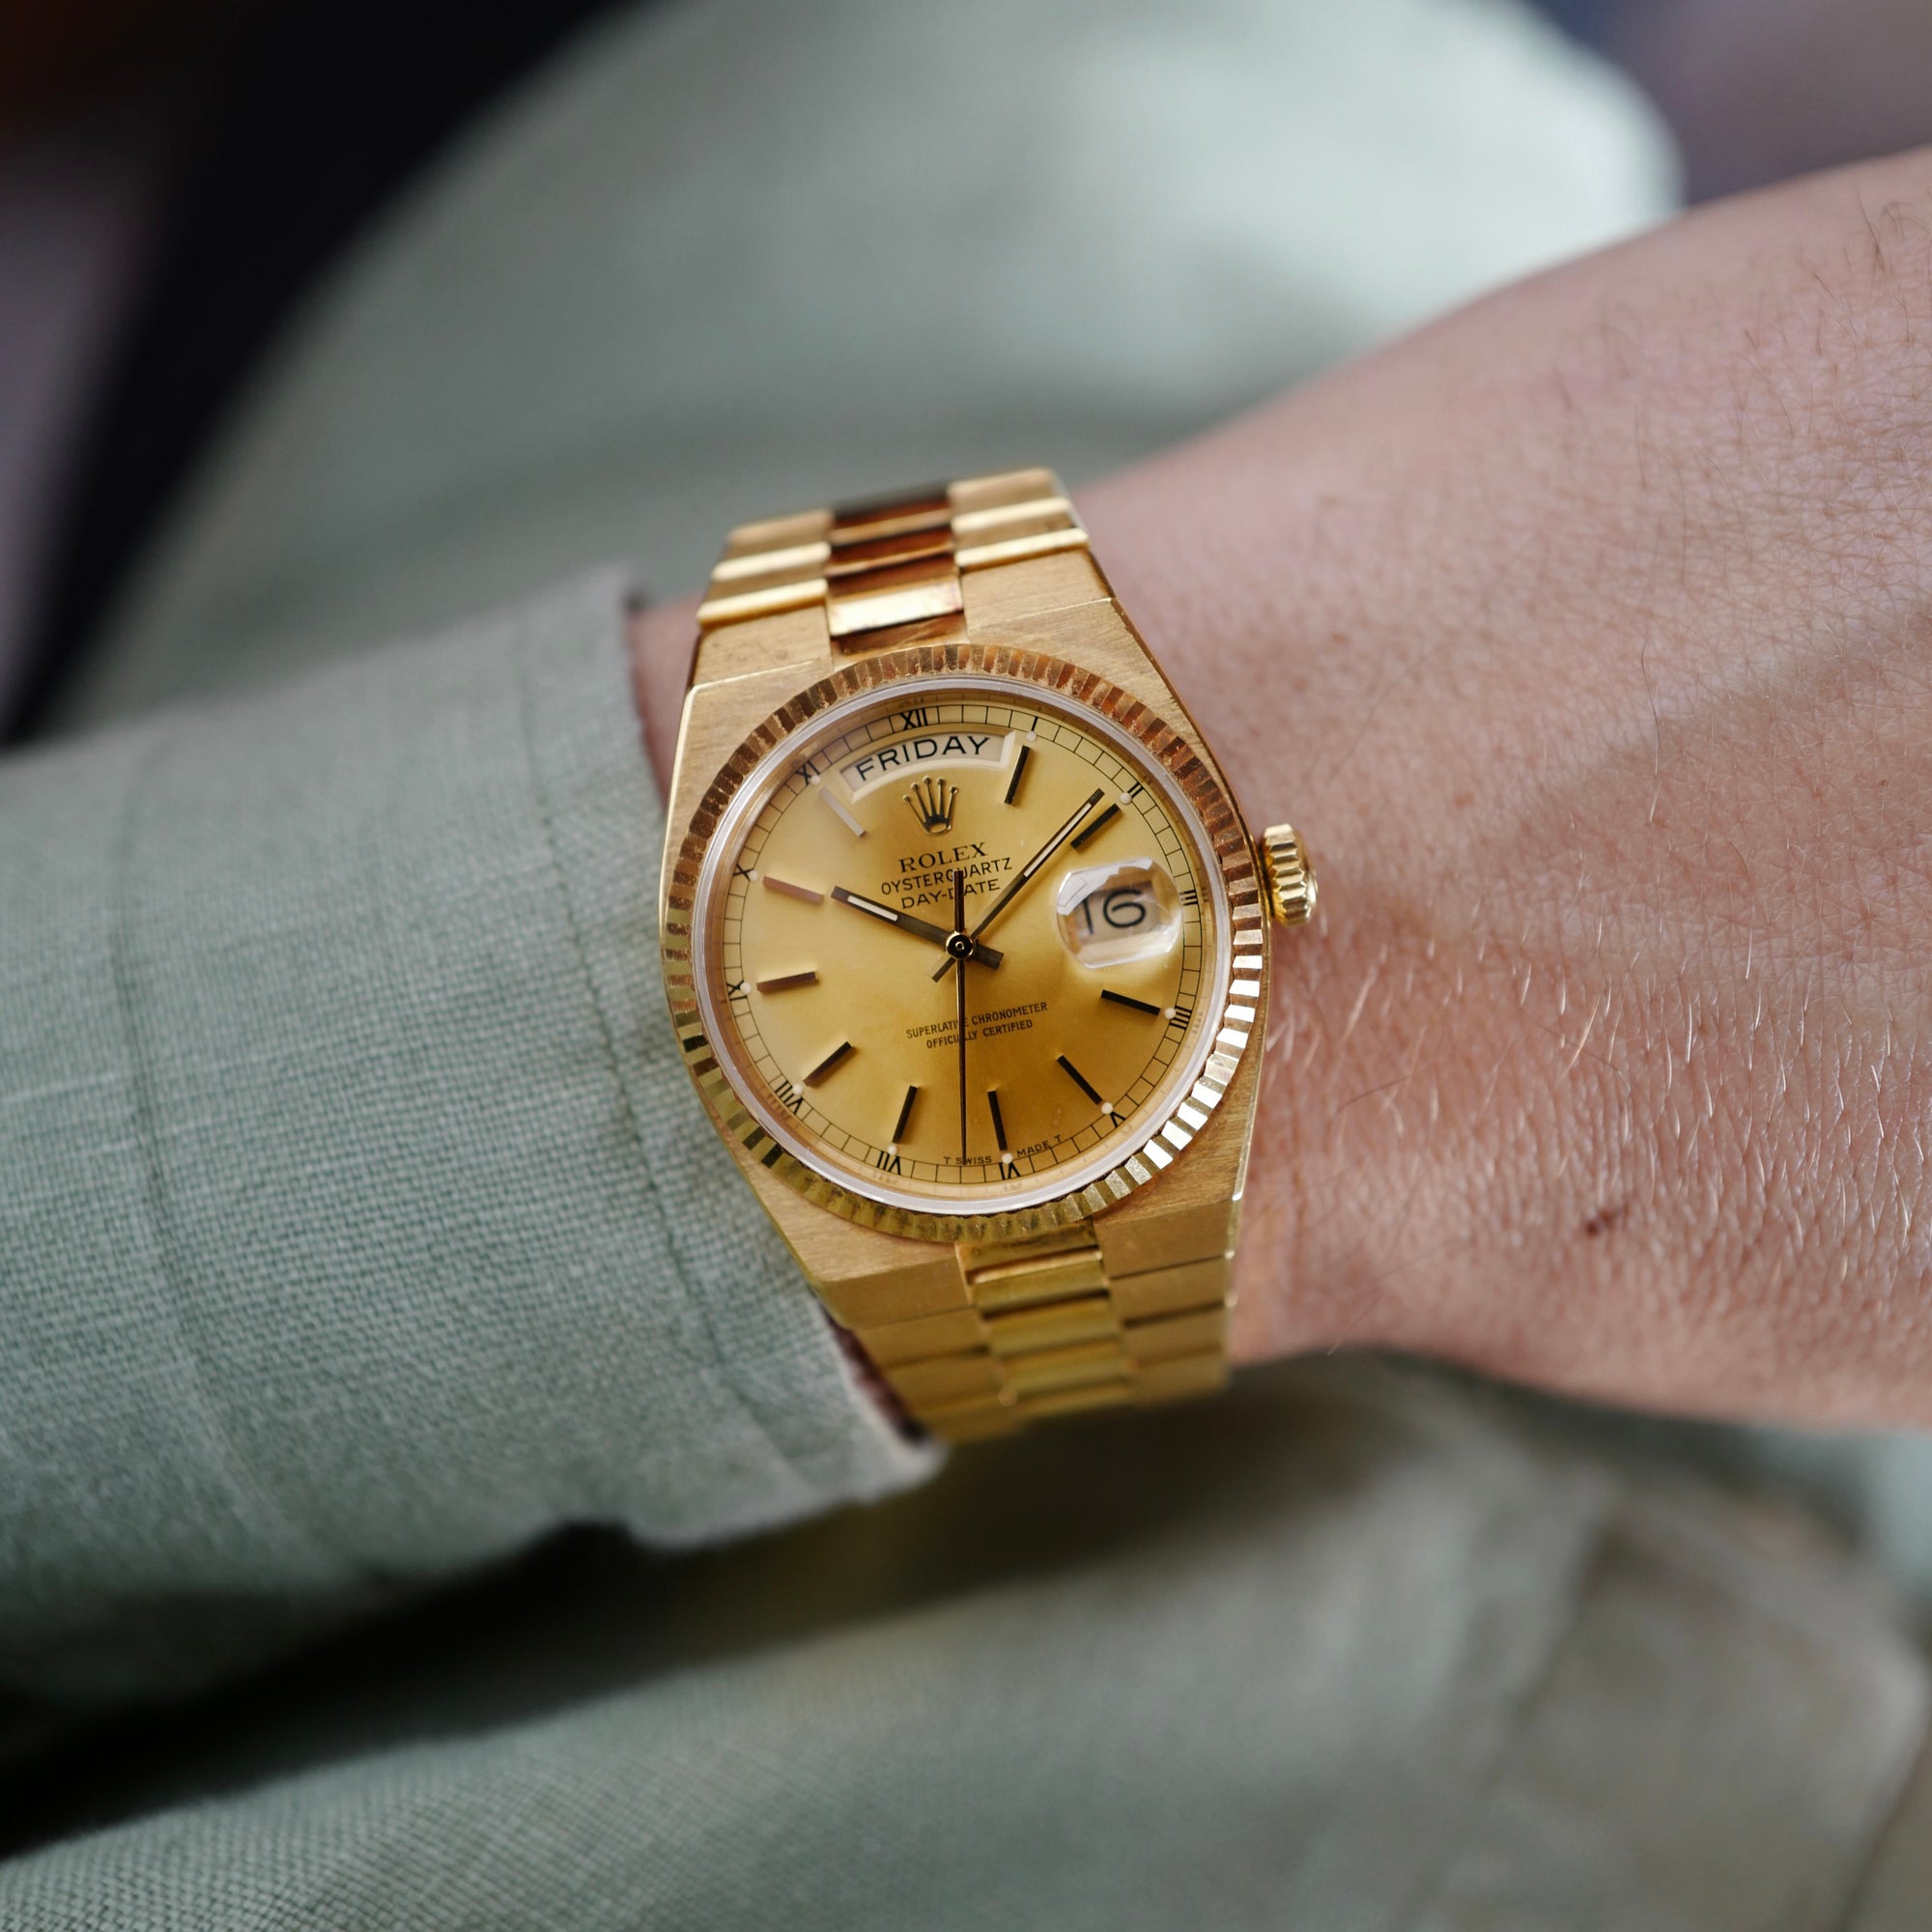 Rolex Yellow Gold Day-Date Oysterquartz Ref. 19018